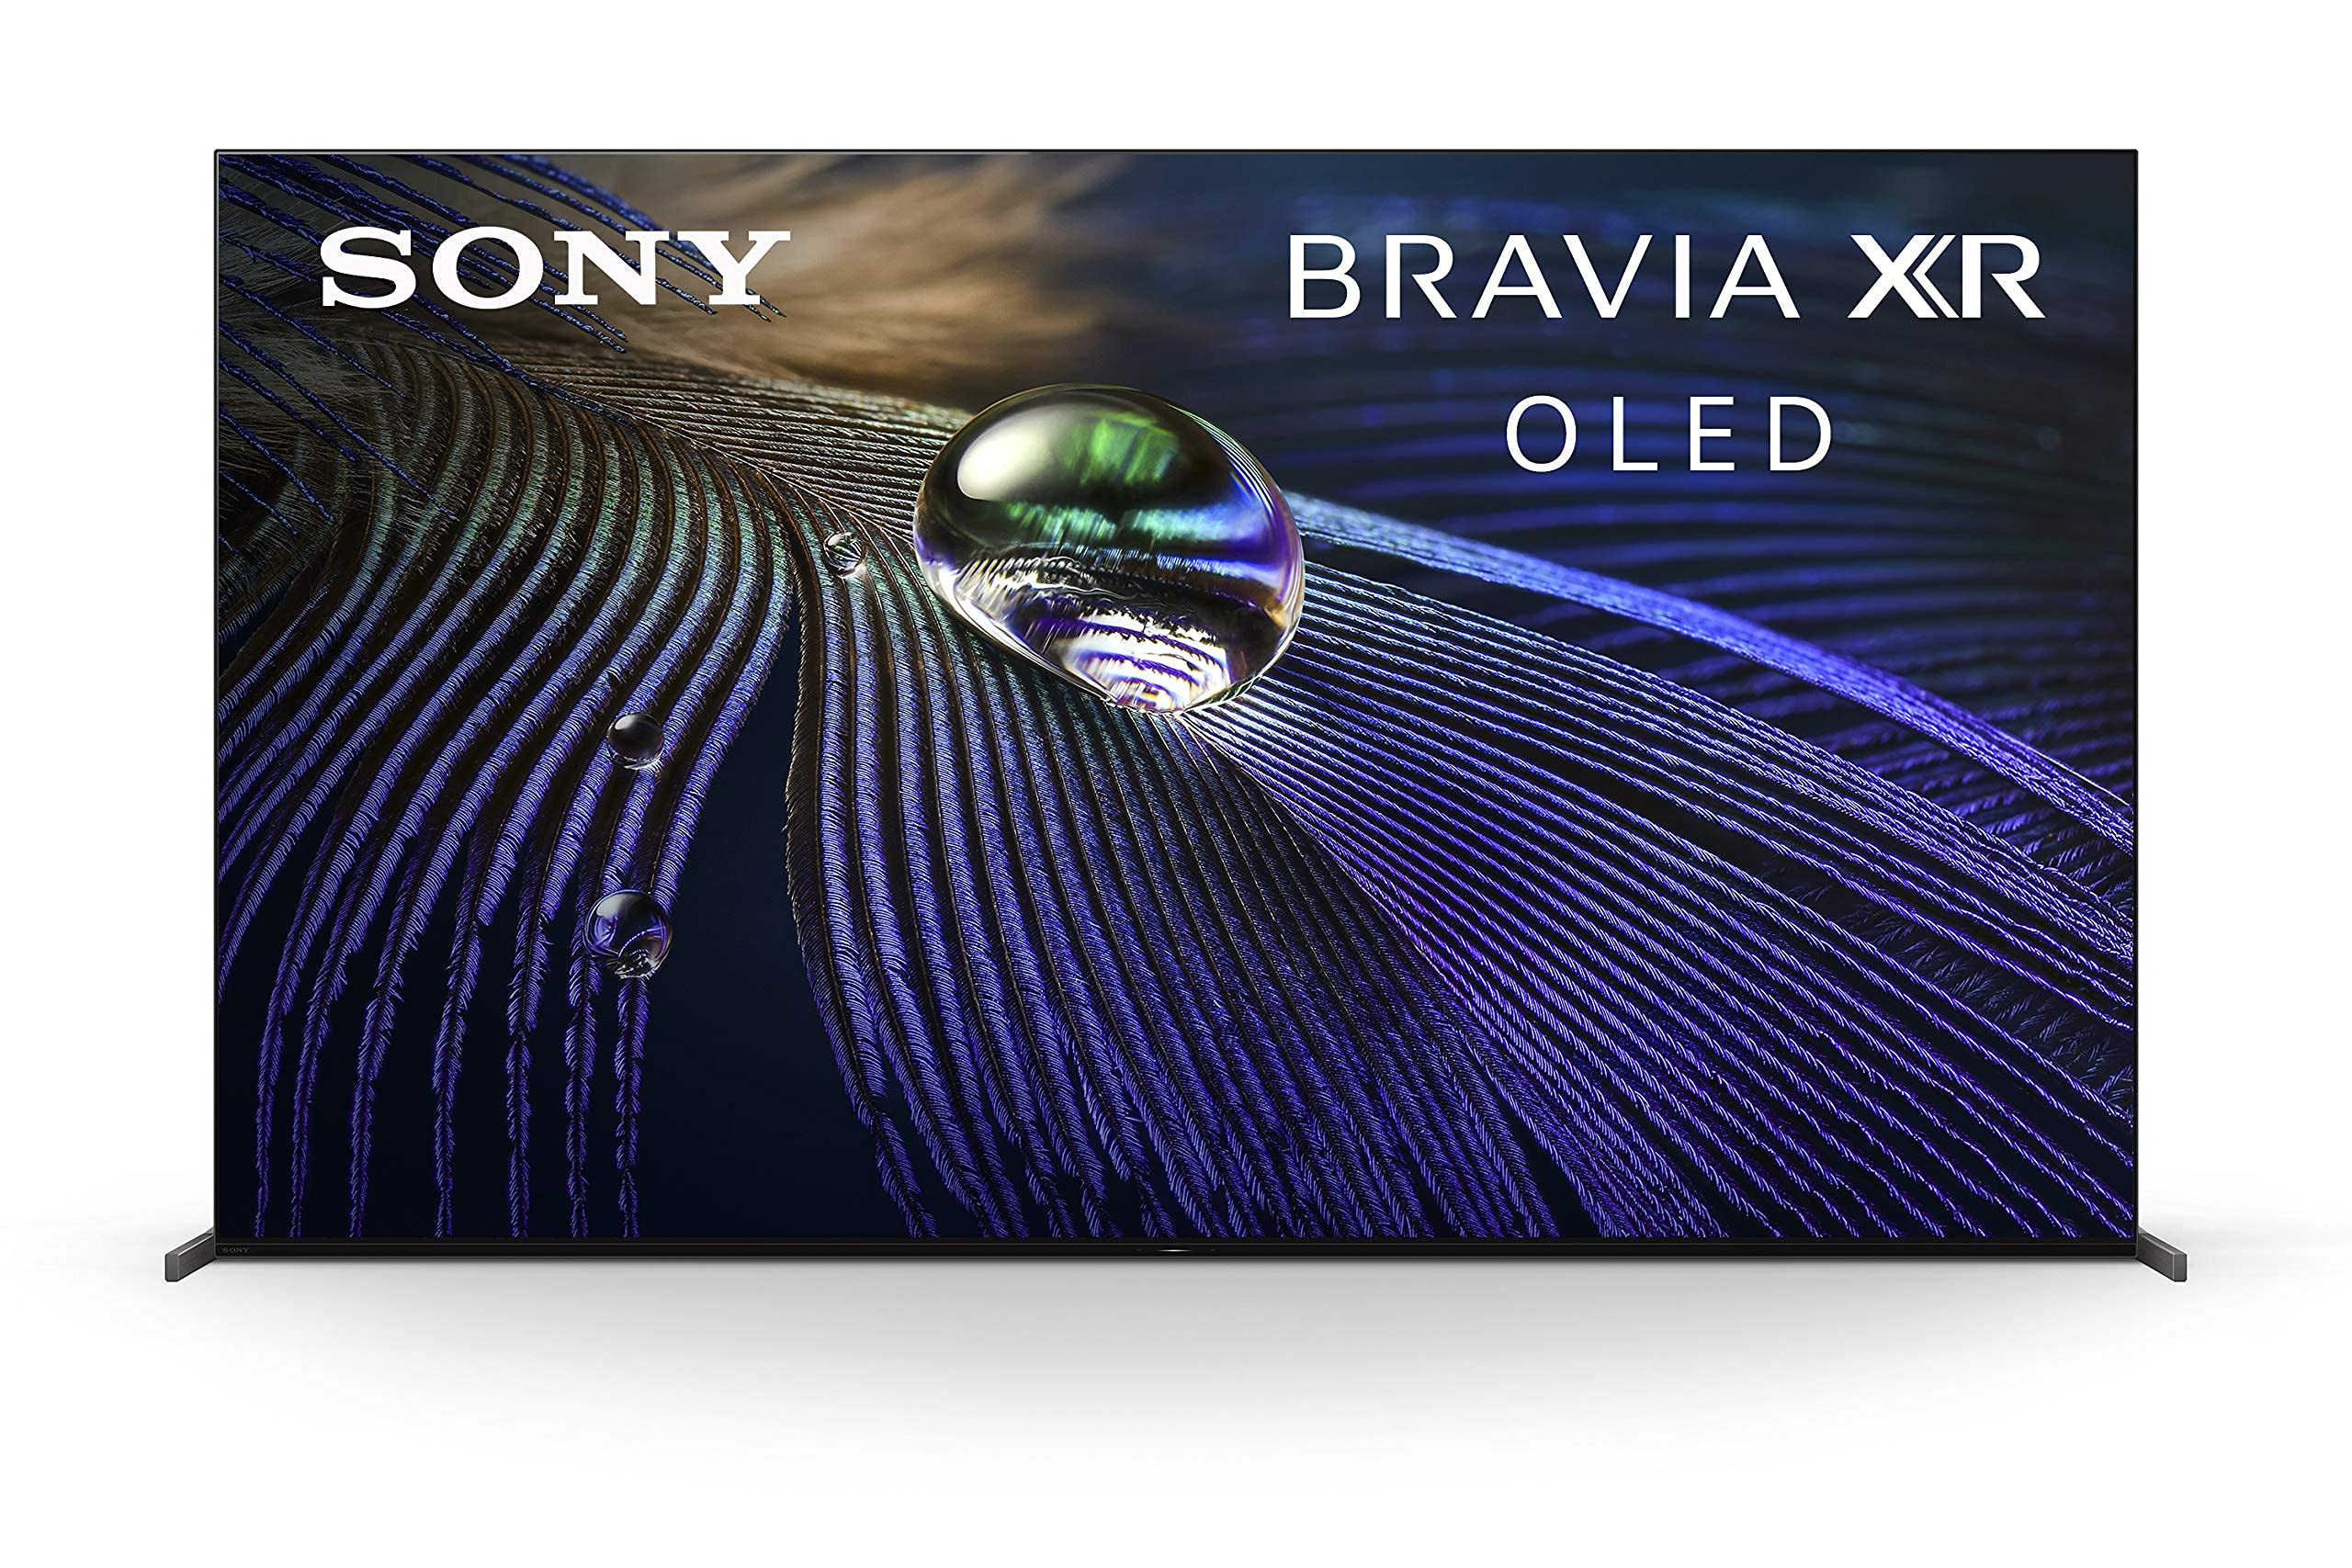 83" OLED Sony A90J $2,000 off: $5,999.99 at Best Buy